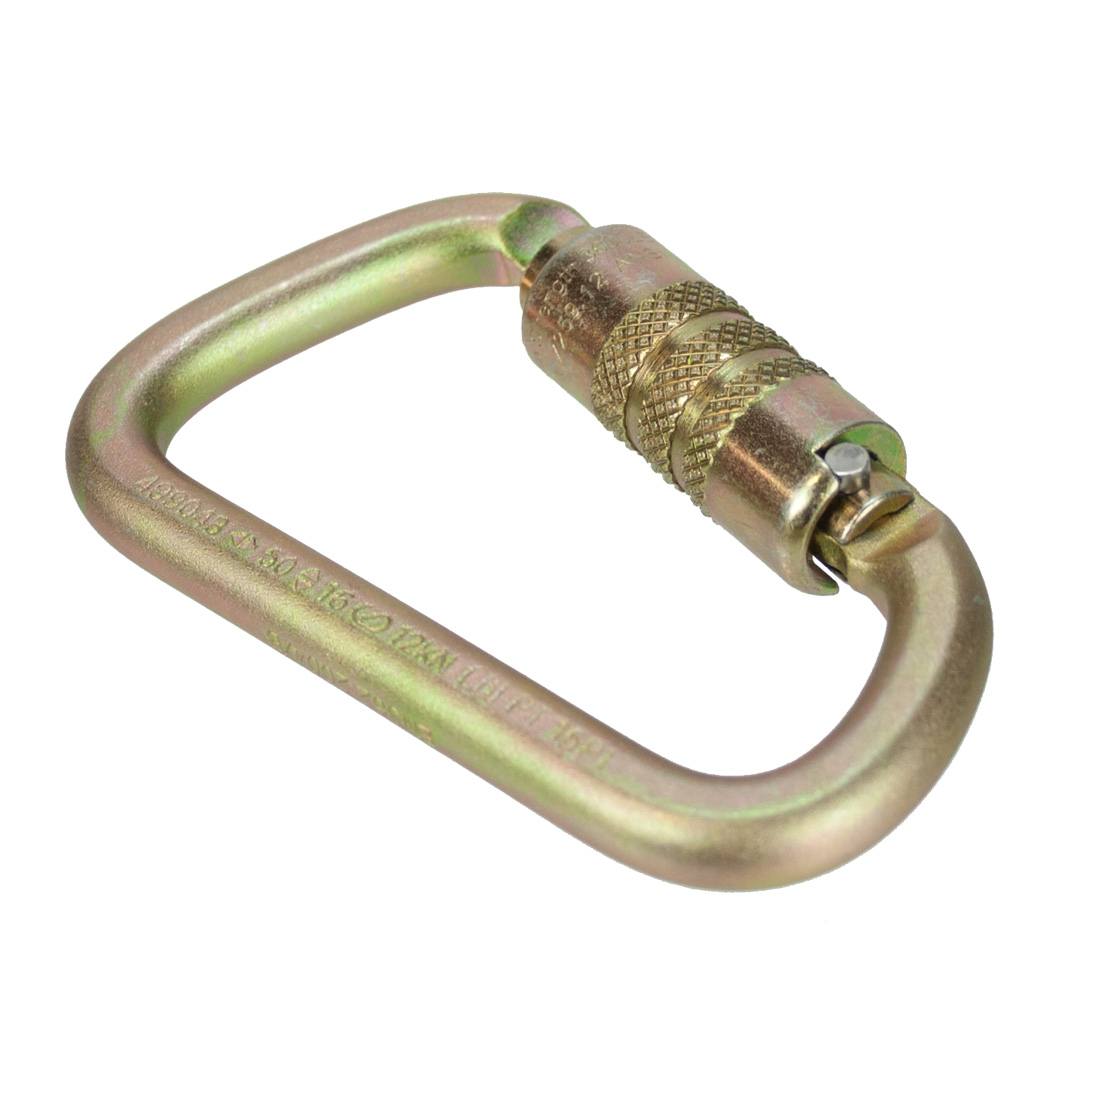 Liberty Mountain ANSI Modified D Carabiner - Triple Lock - Oblique Back View